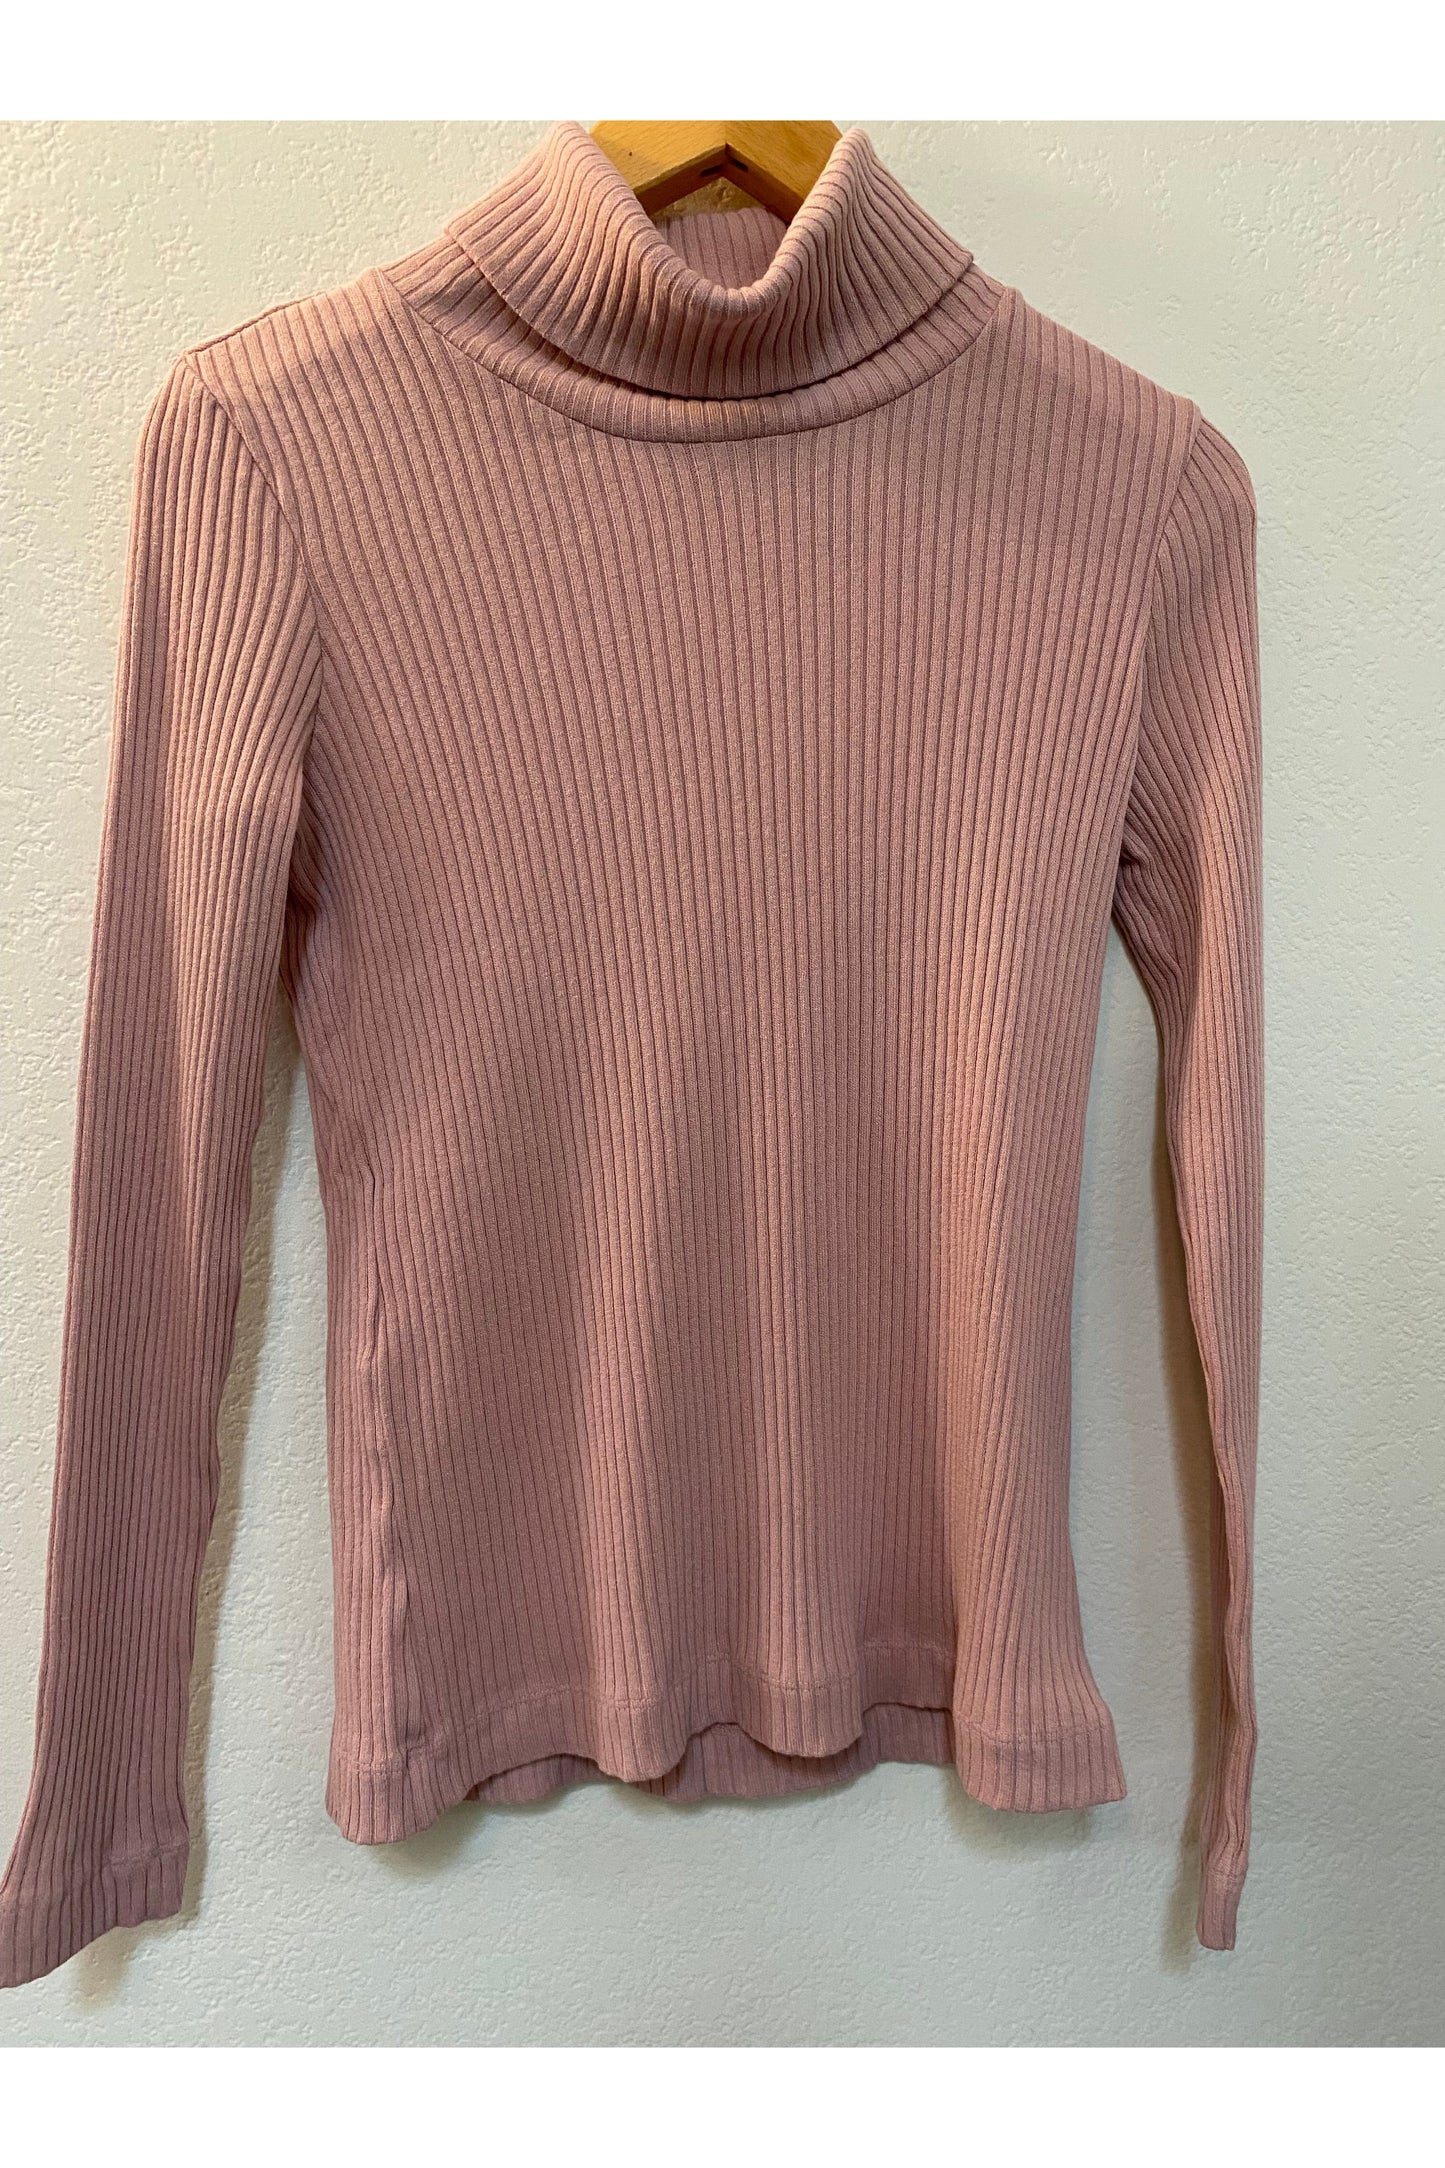 Prairie Cotton - Long Sleeve Ribbed Turtle Neck - Three Colors - 4607